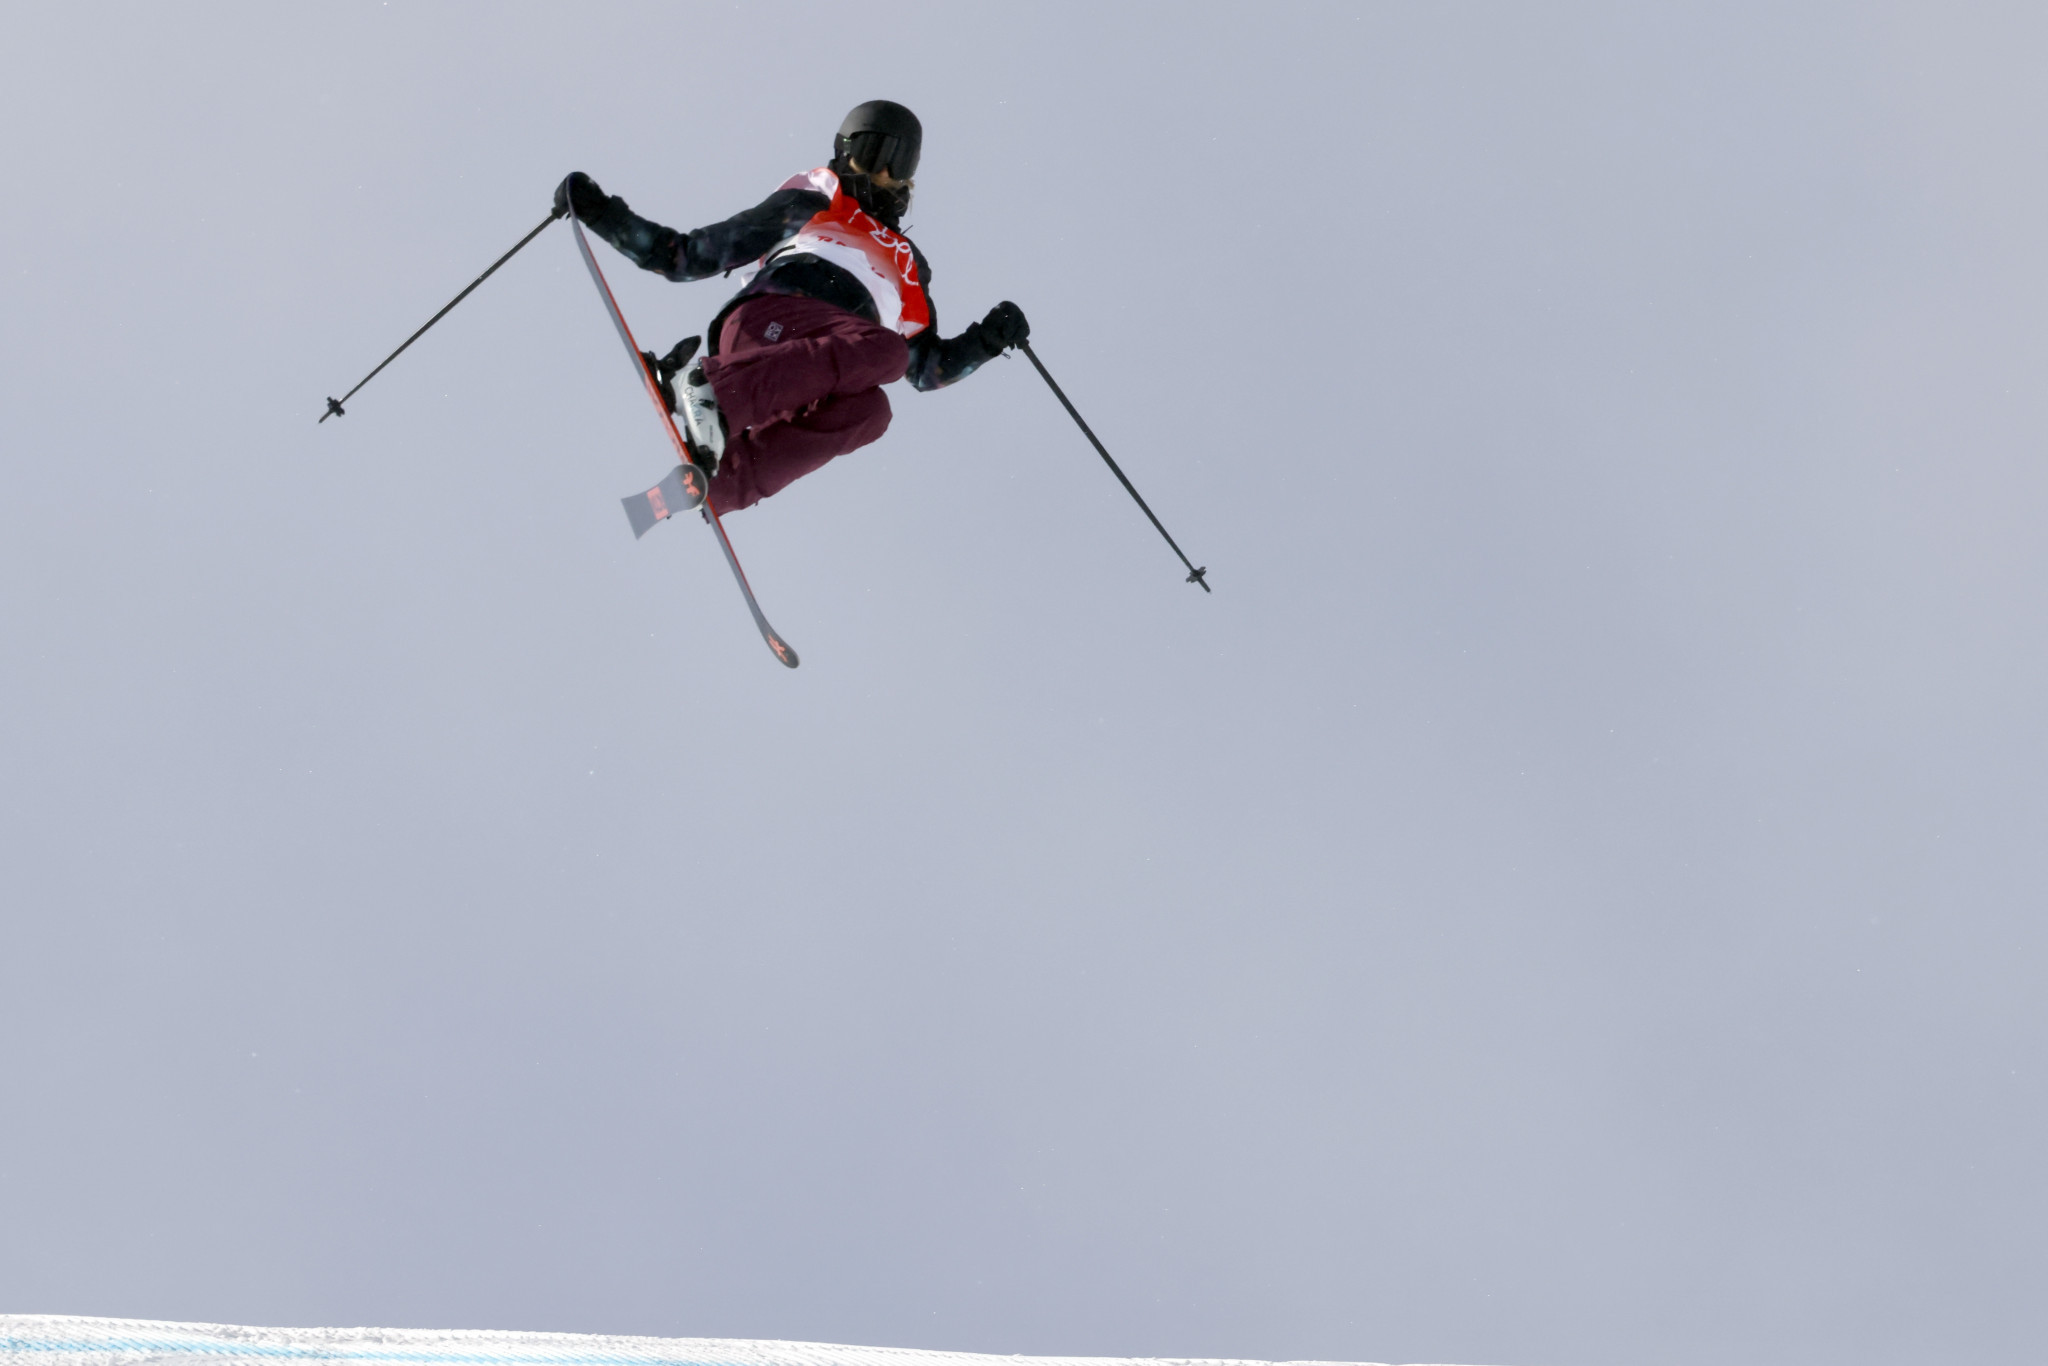 The slopestyle discipline is Kelly Sildaru's first title in a FIS World Cup ©Getty Images